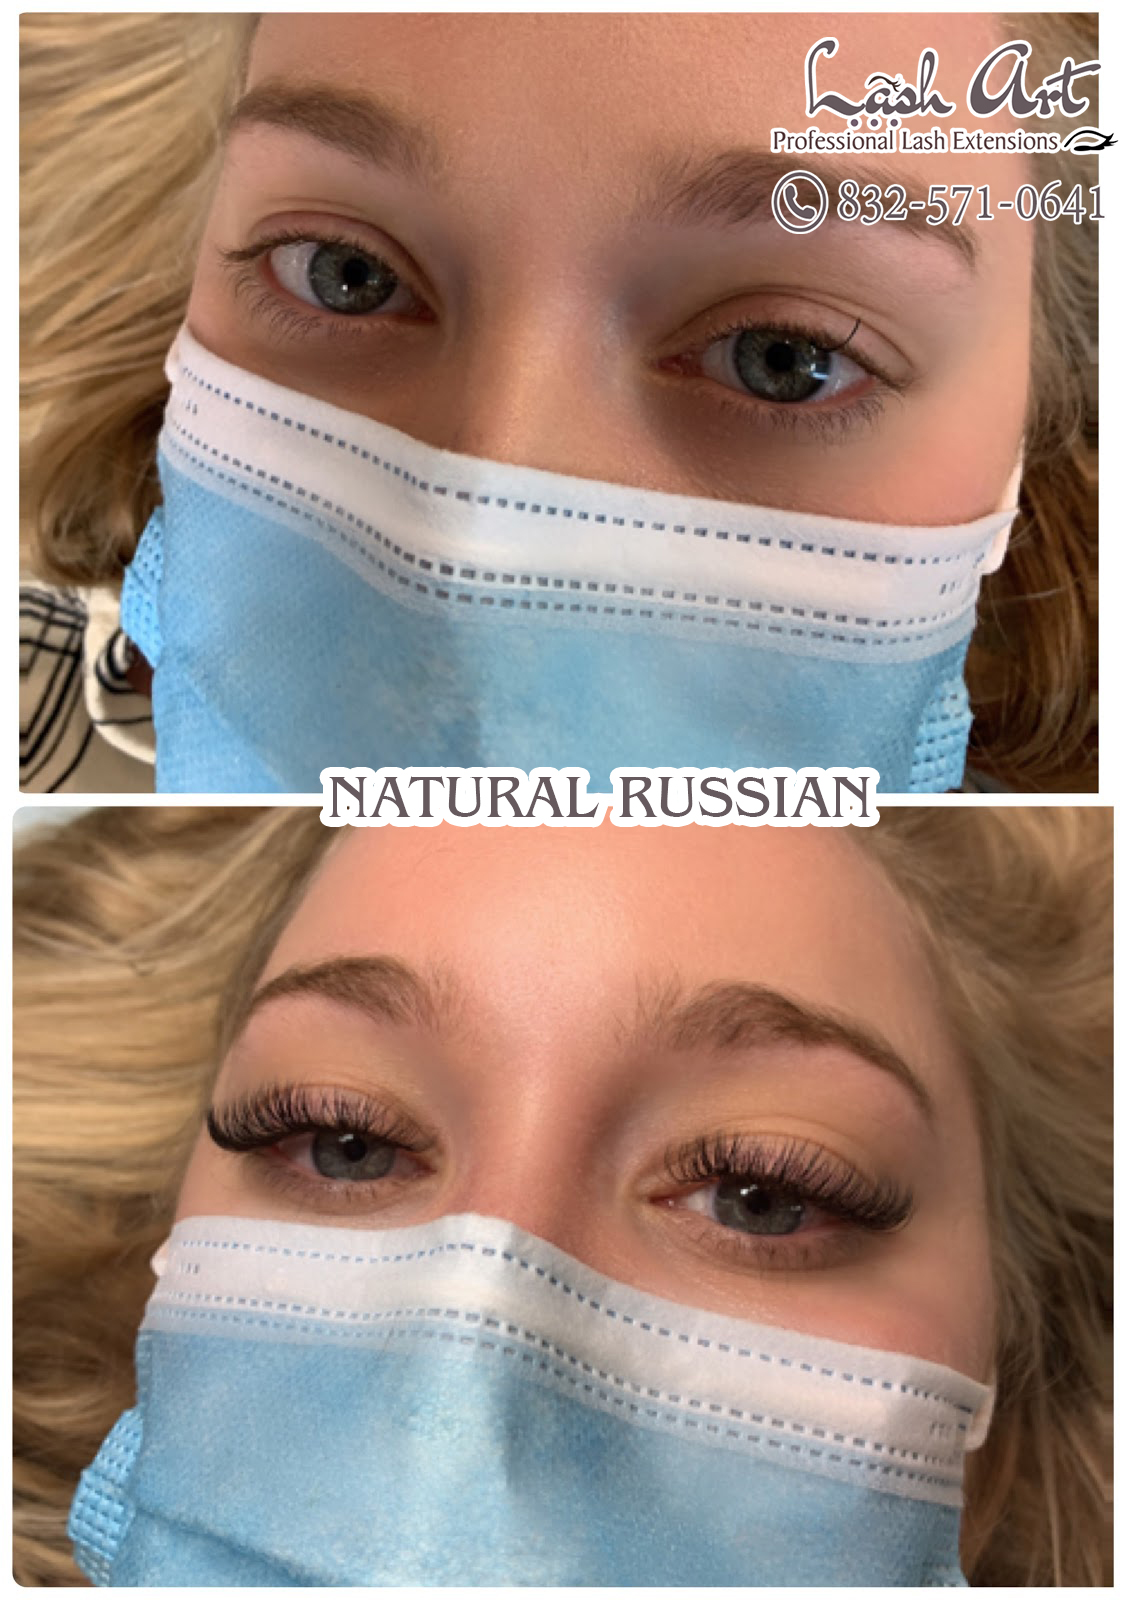 There’s no need for a break in between eyelash extensions if they’re applied correctly.